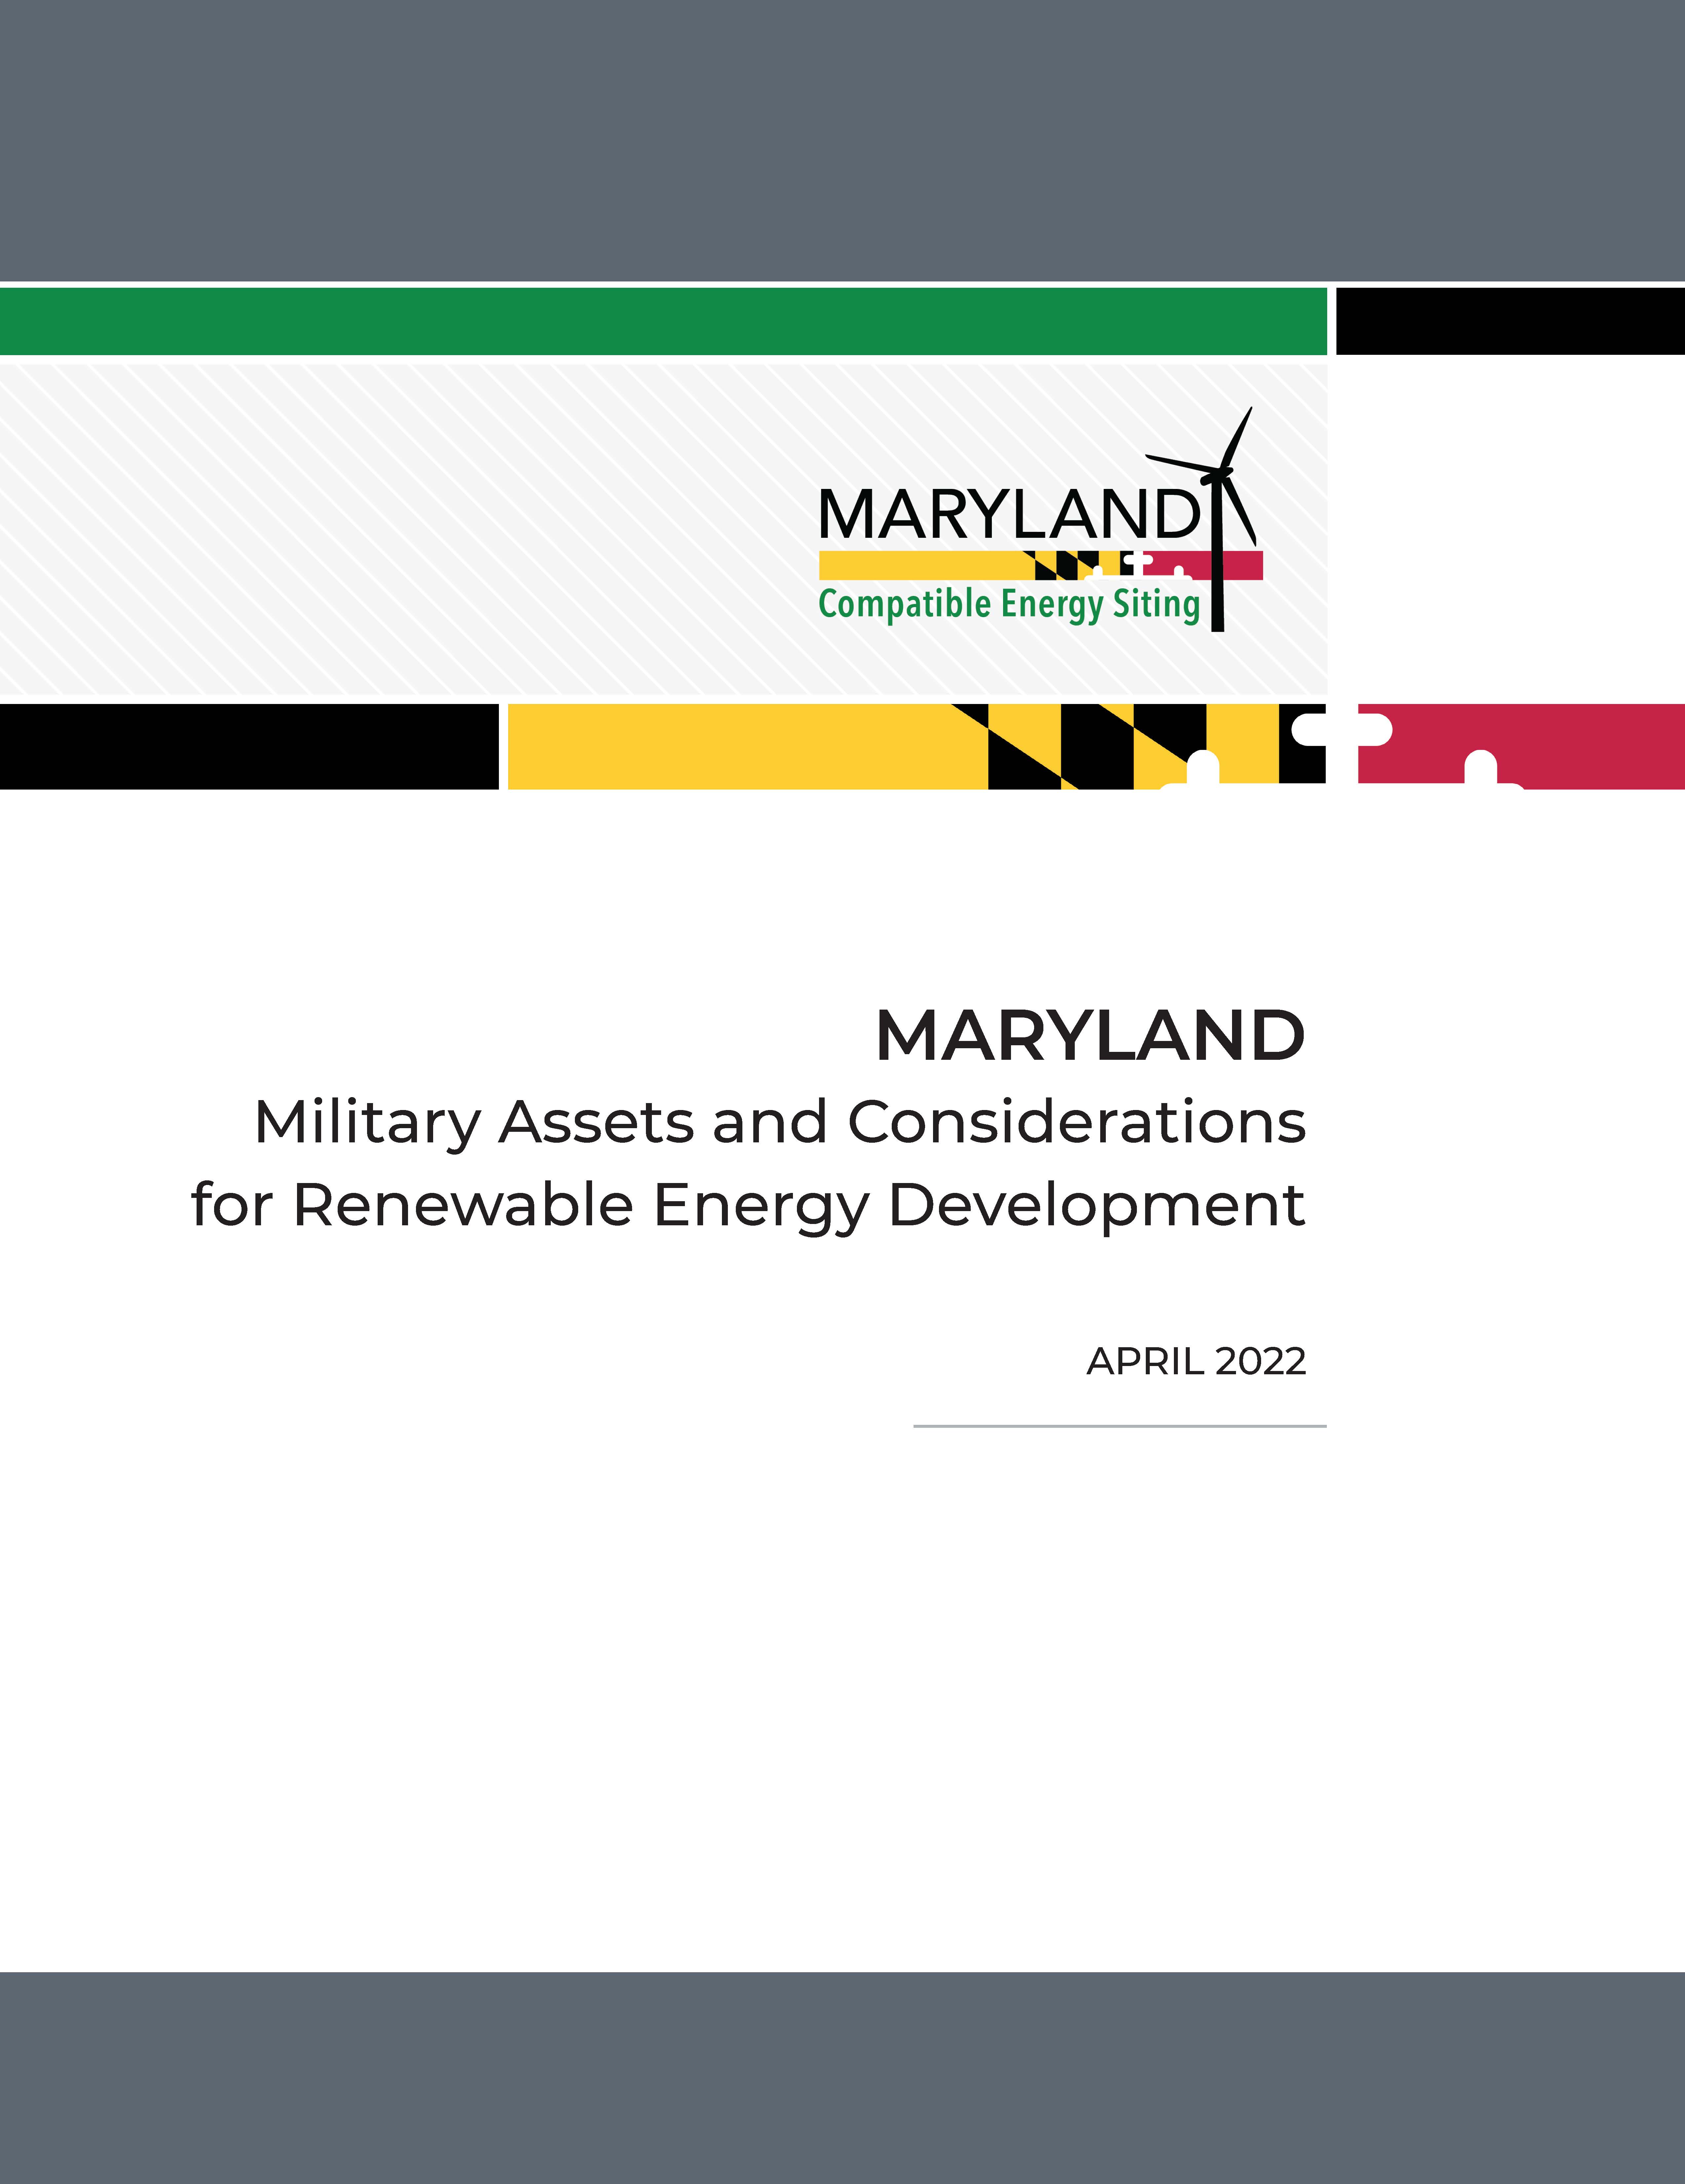 Maryland Military Operations and Considerations Report